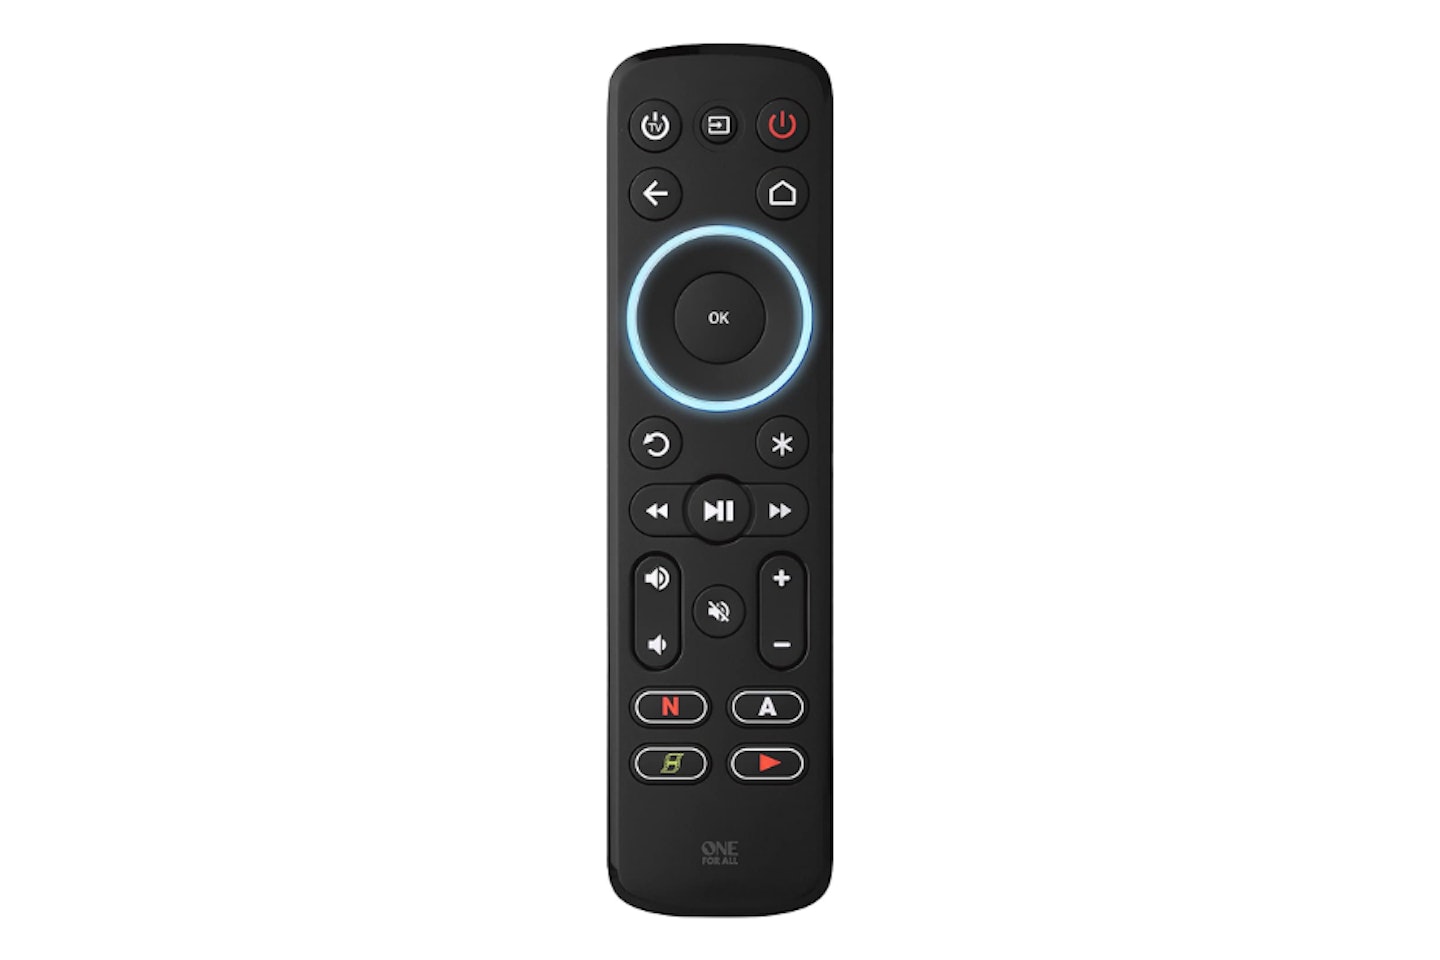 One For All Streamer Remote - possibly the best TV remote